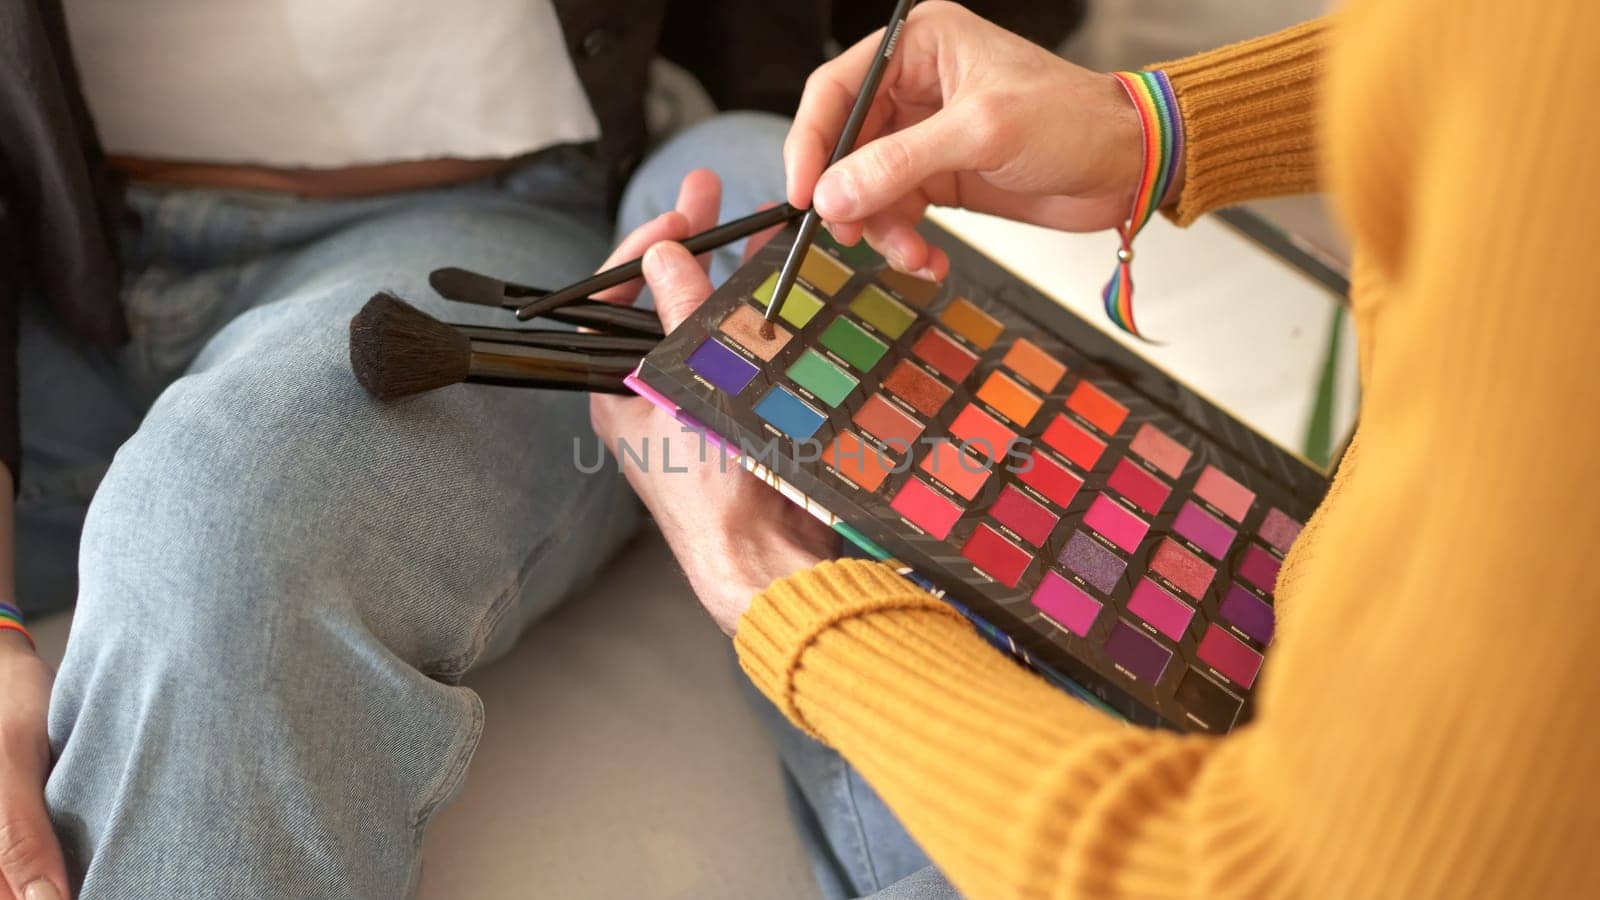 A person picking up powder from the colour palette of a make-up kit.